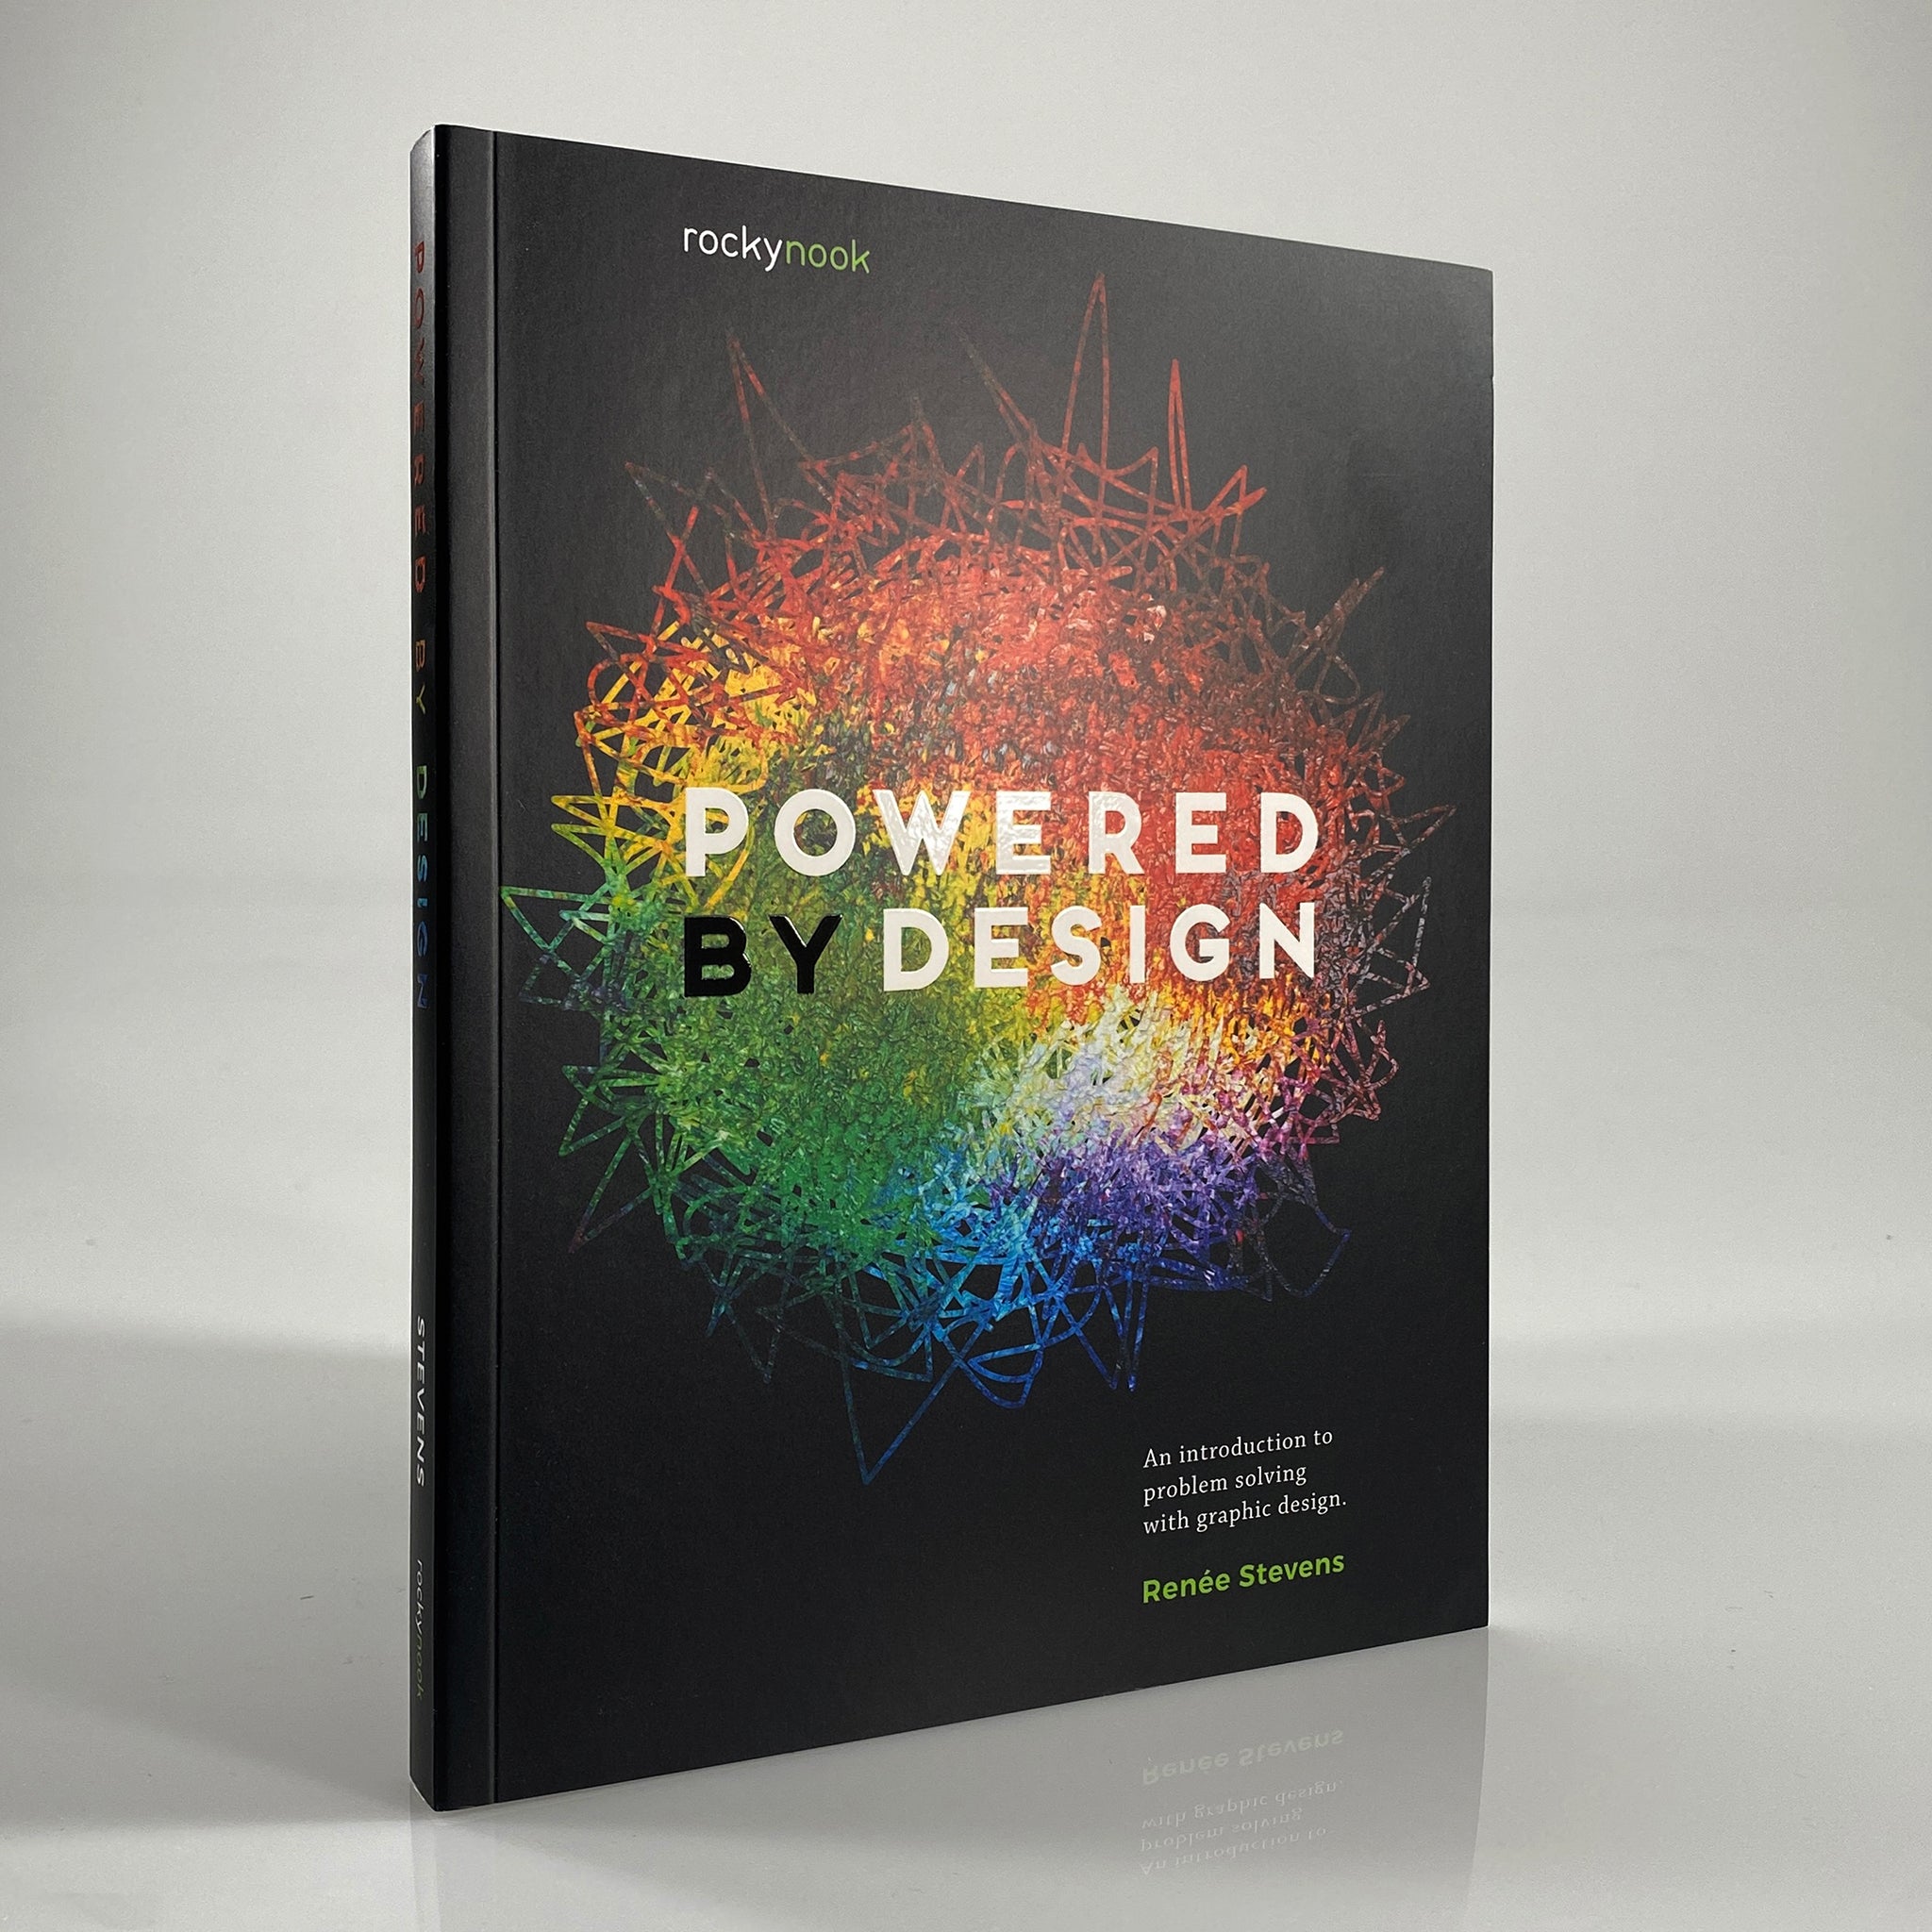 Powered by Design: An Introduction to Problem Solving with Graphic Design